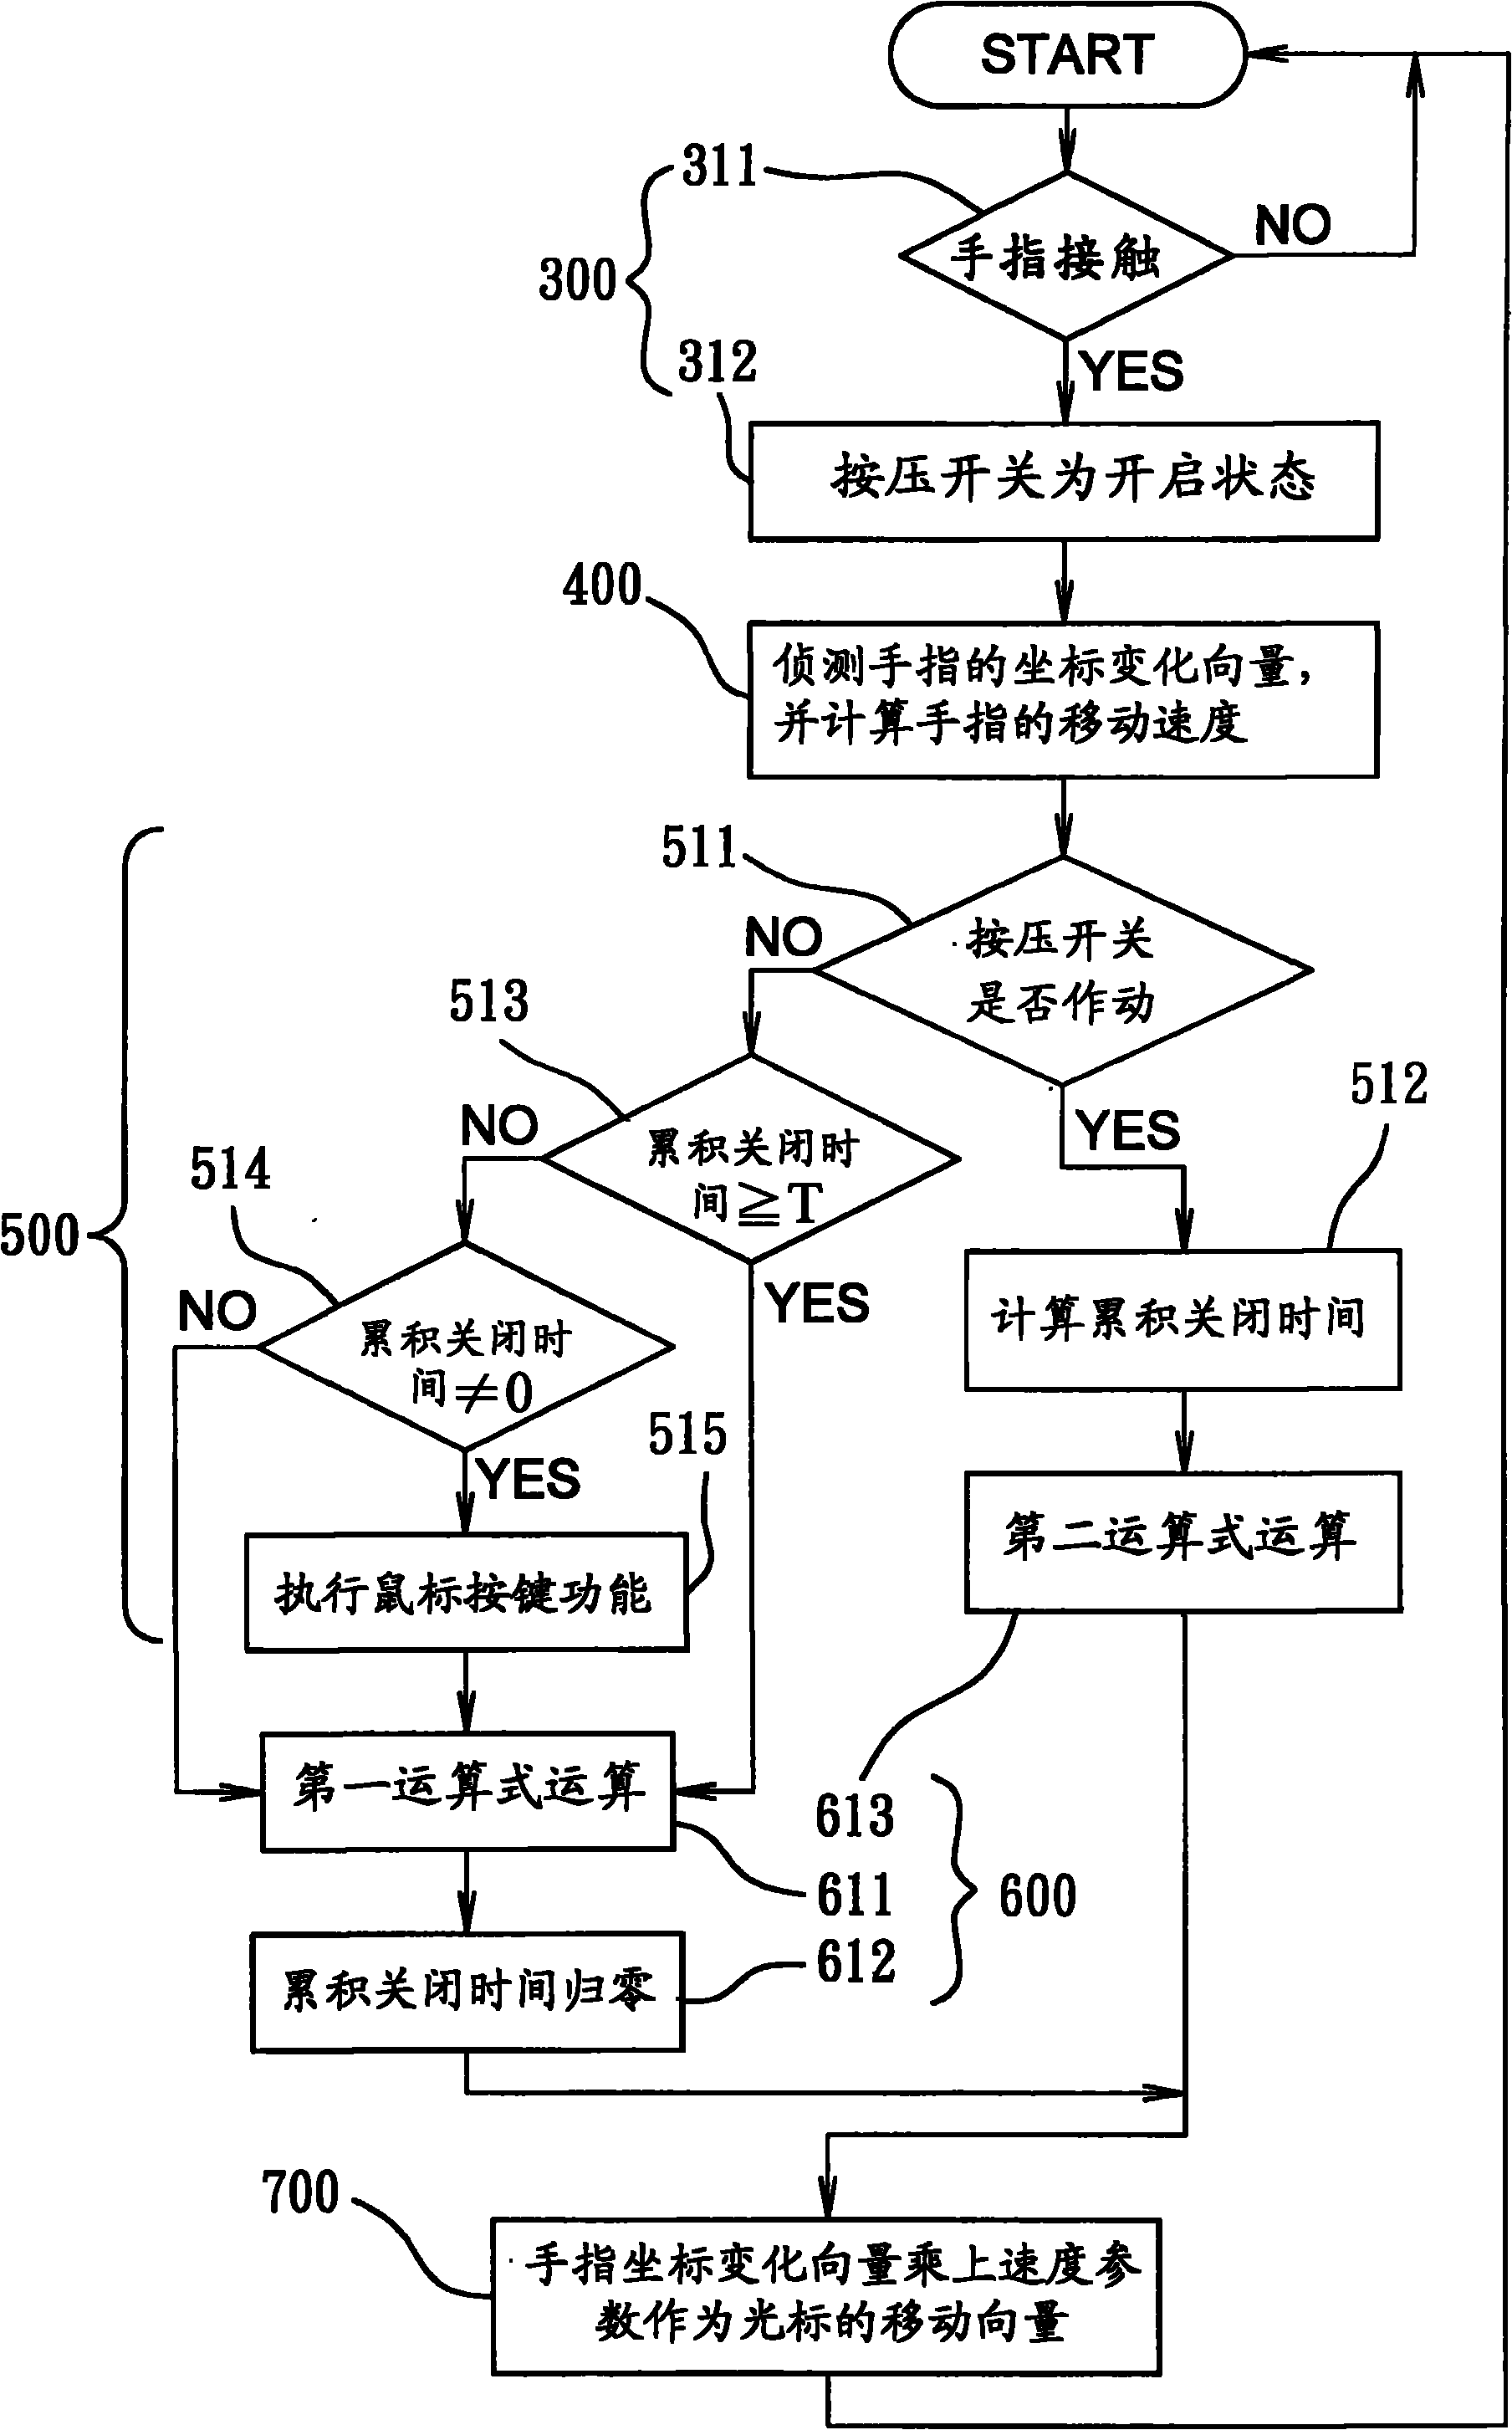 Multiple variable speed touch pad cursor control method